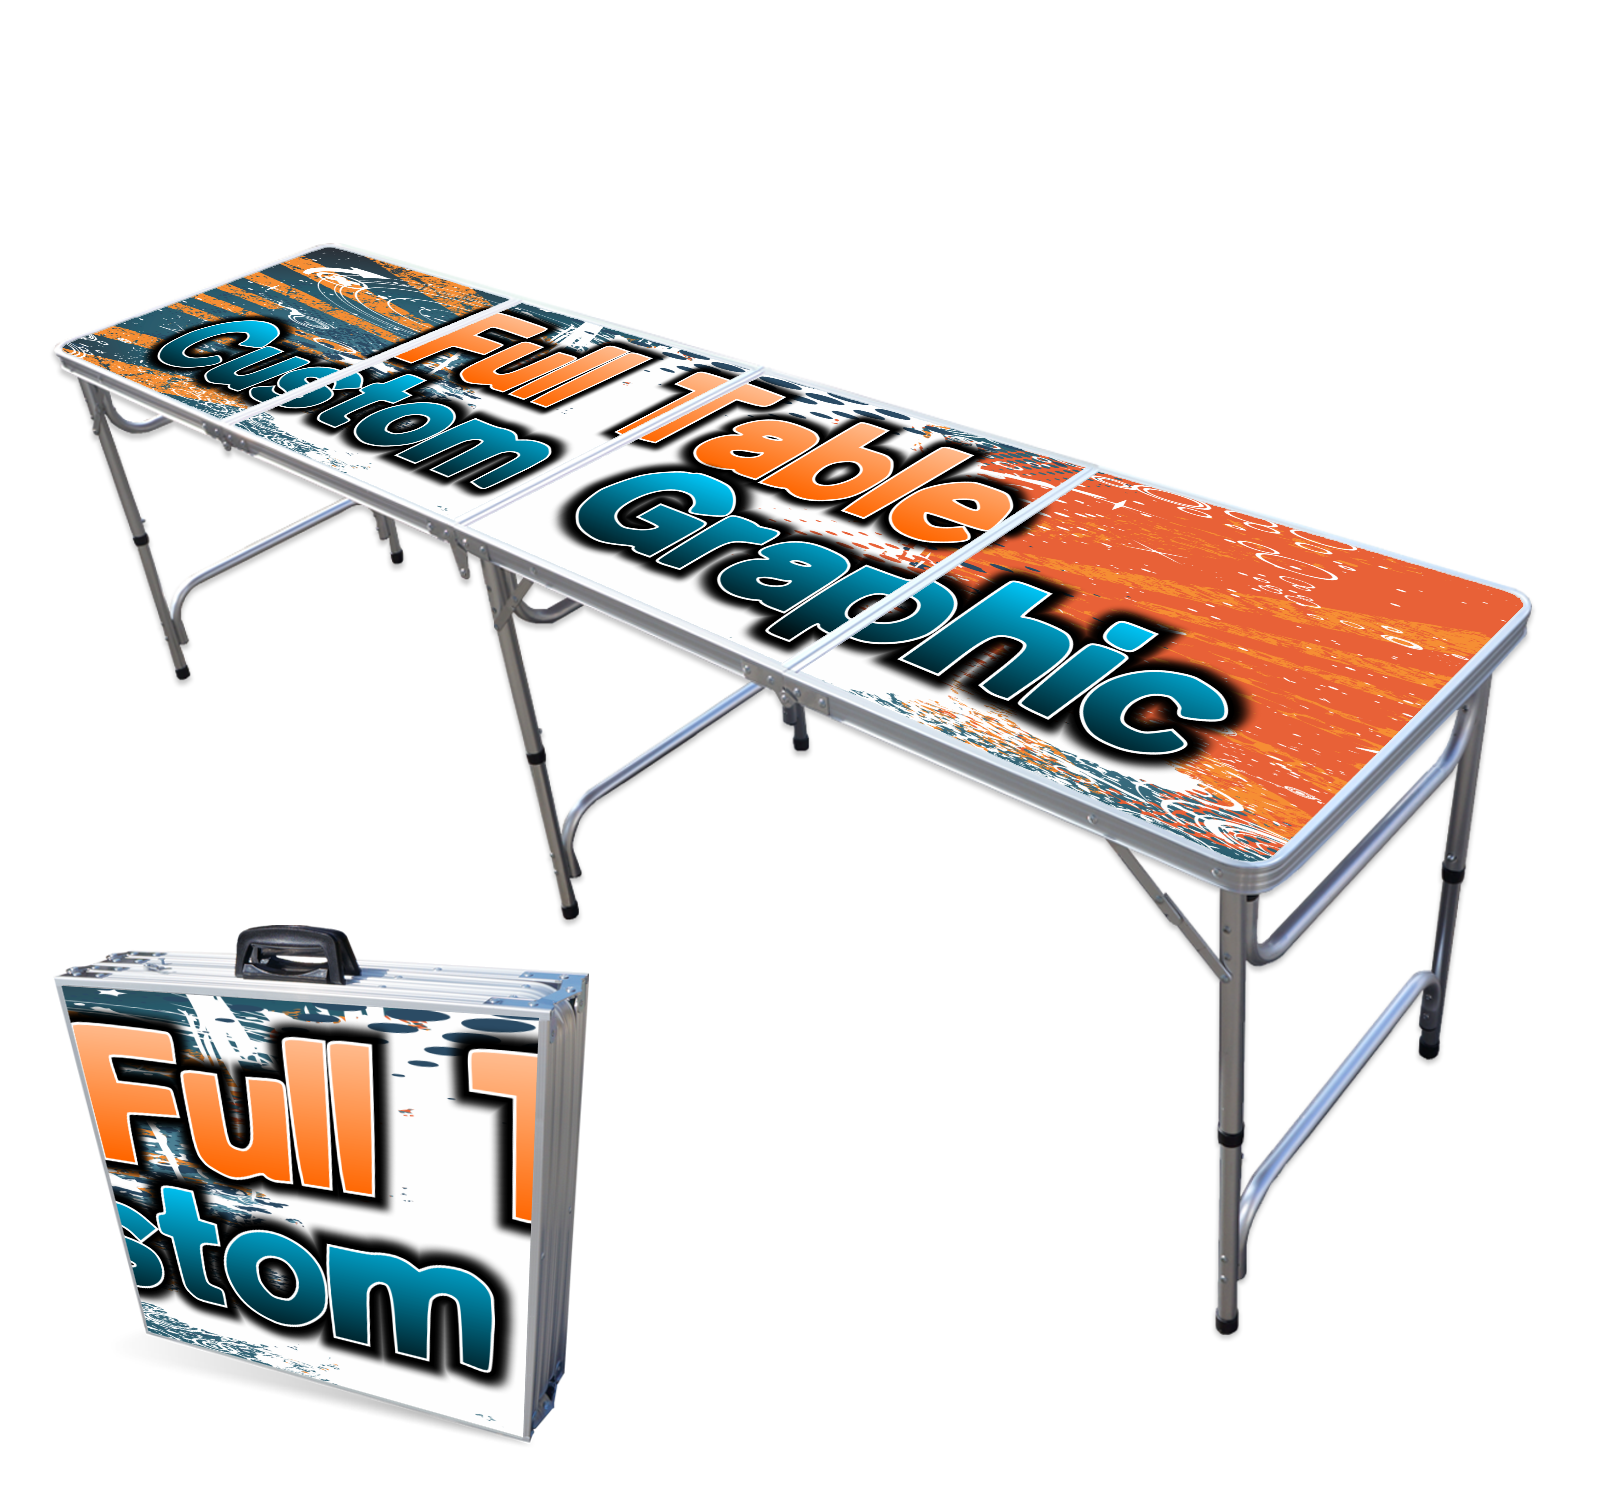 Last Supper Beer Pong Table